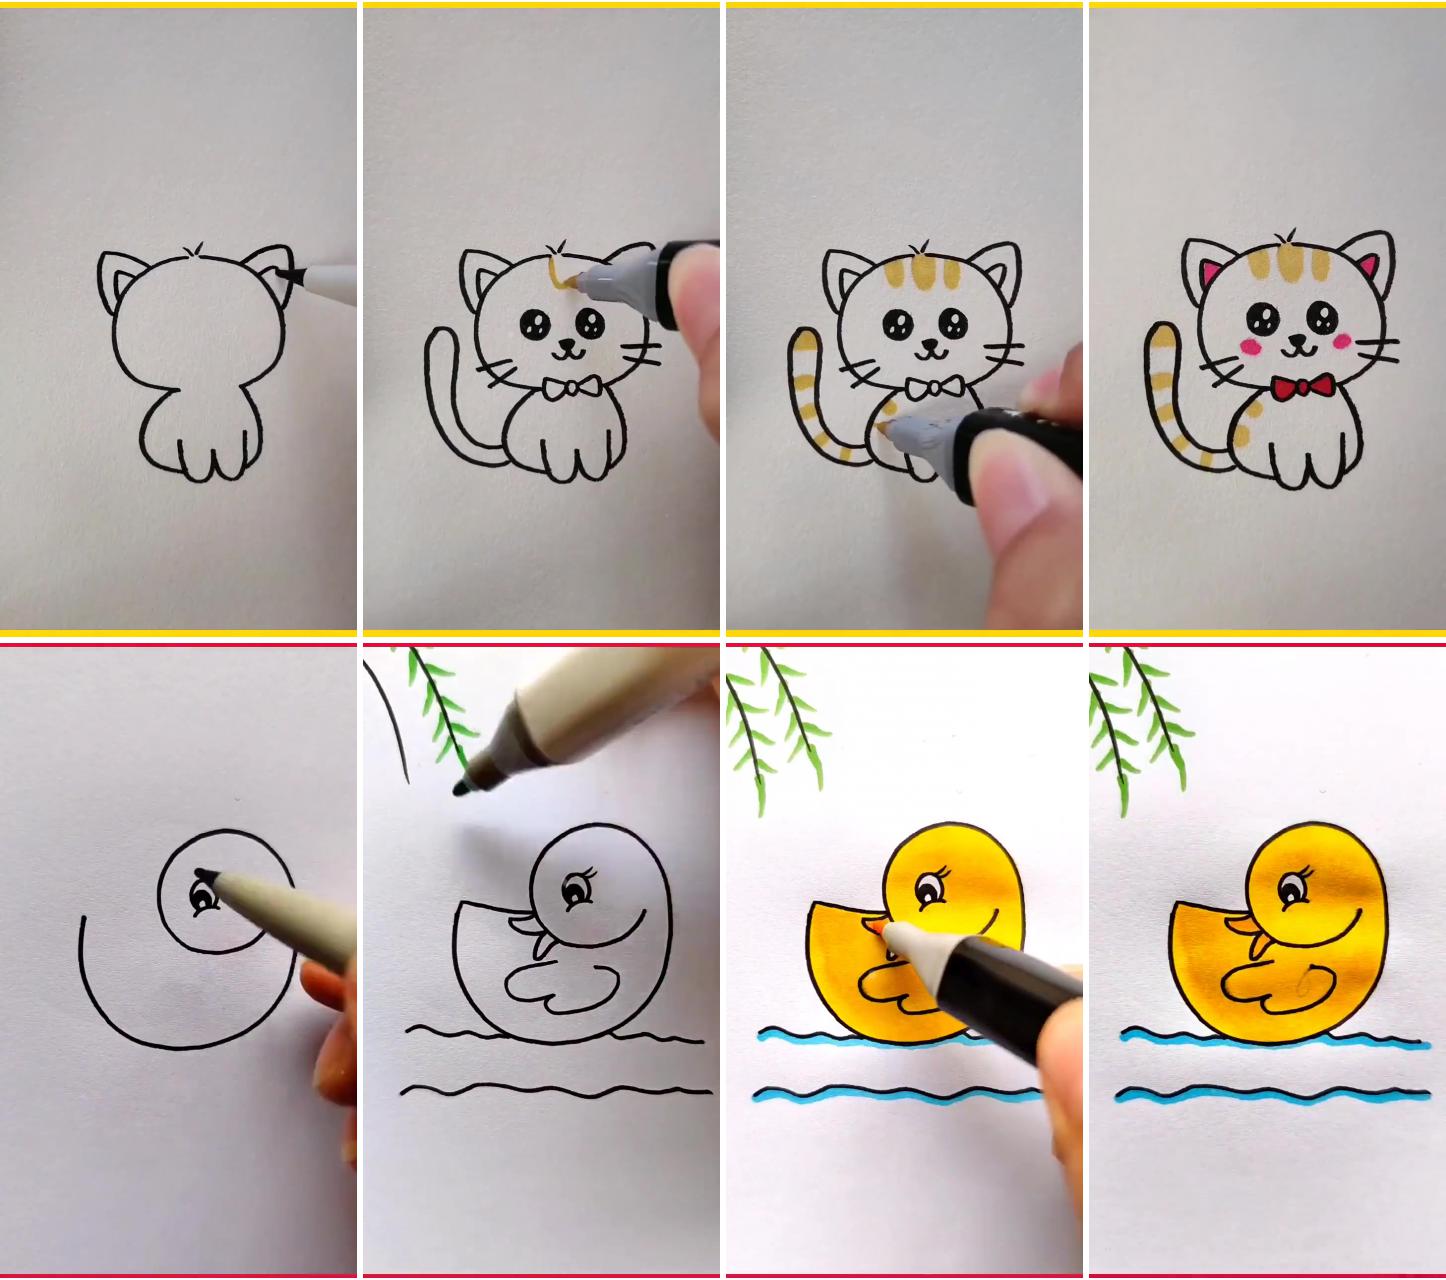 How to draw an easy cat illustration | how to draw a duck easy art tutorial for beginners